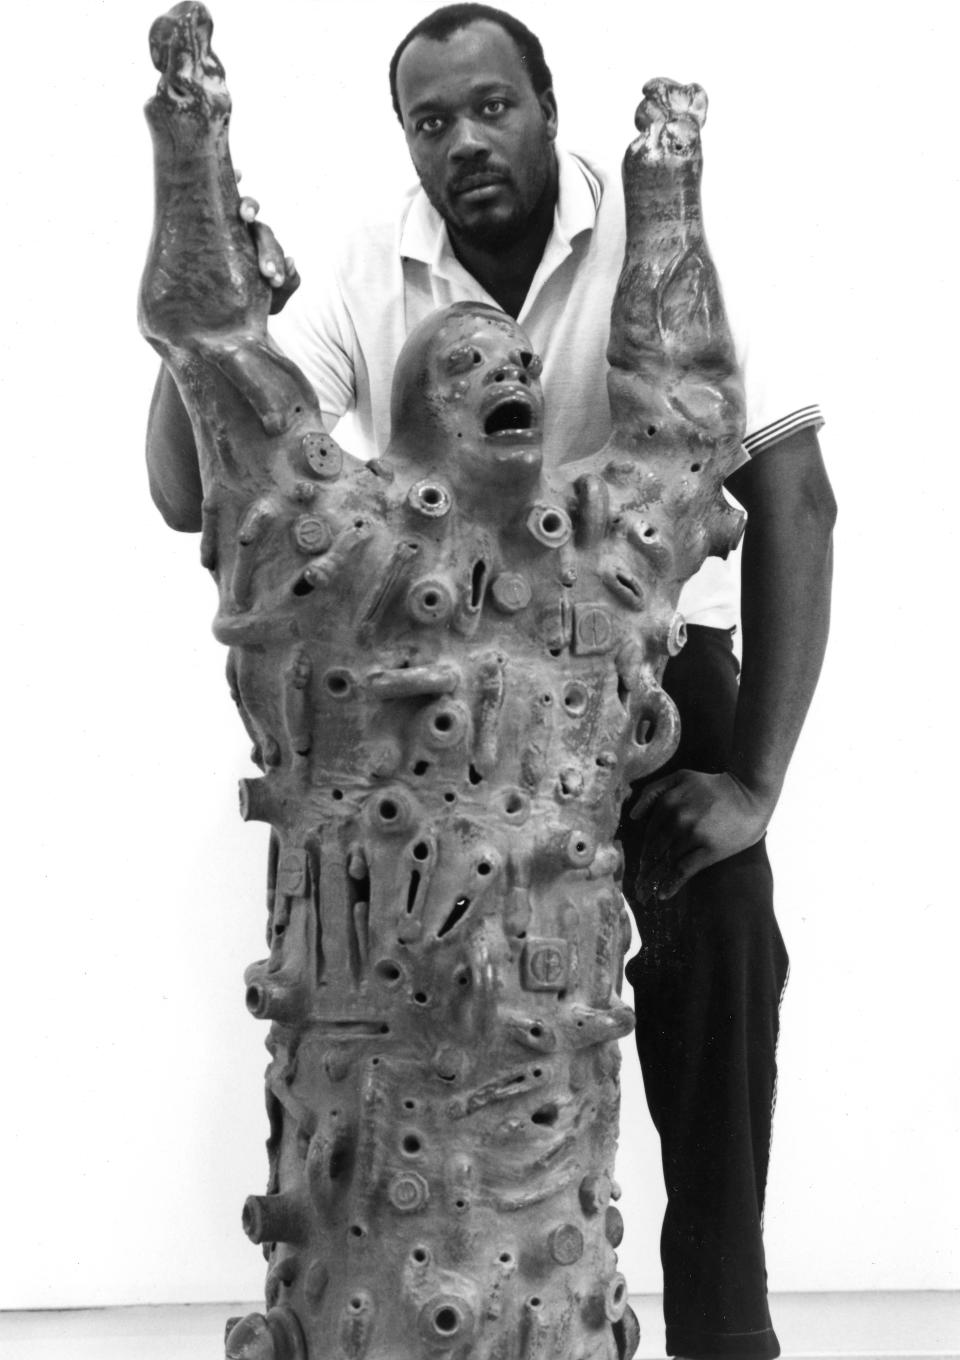 Artist Nathaniel Bustion Jr. is pictured with one of his works, "The Screaming Man," which he said captured the anger, pain and frustration of the Black experience.